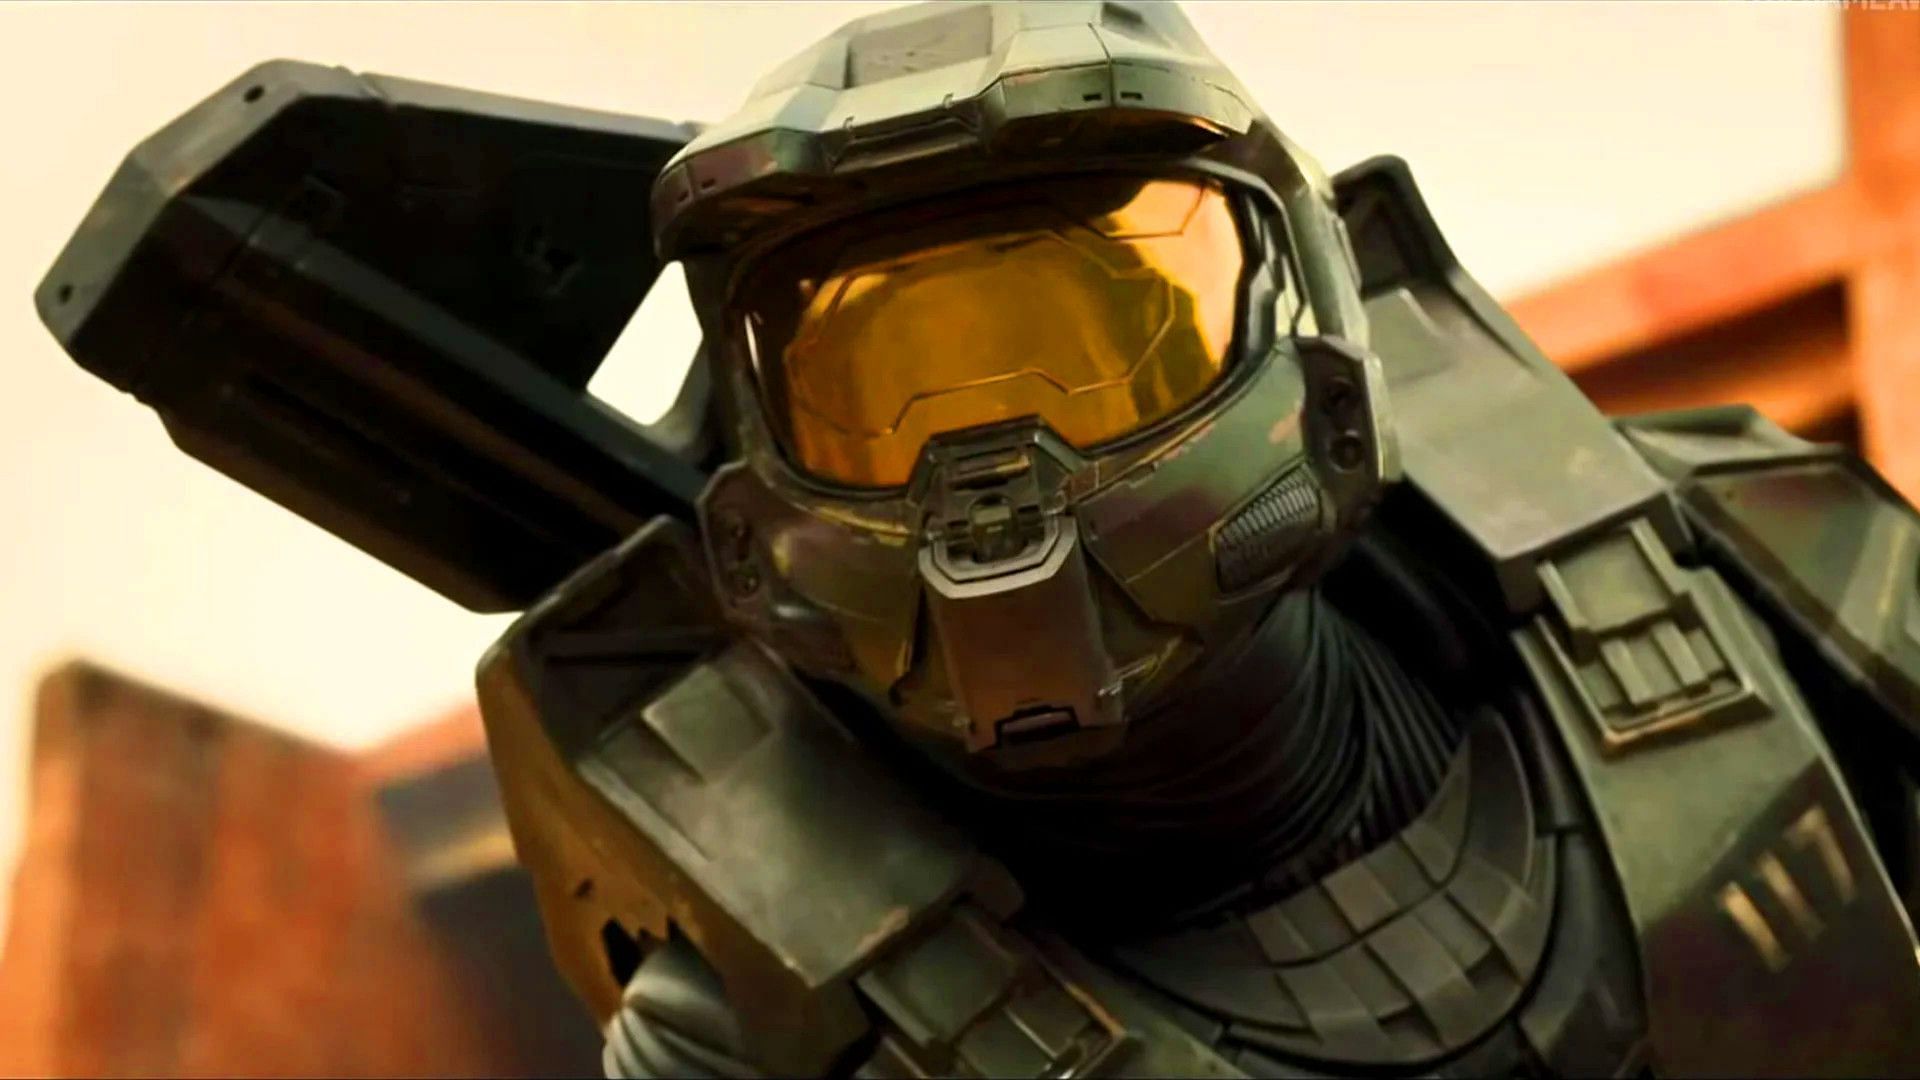 Master Chief drops into action in the TV series (Image via Paramount)